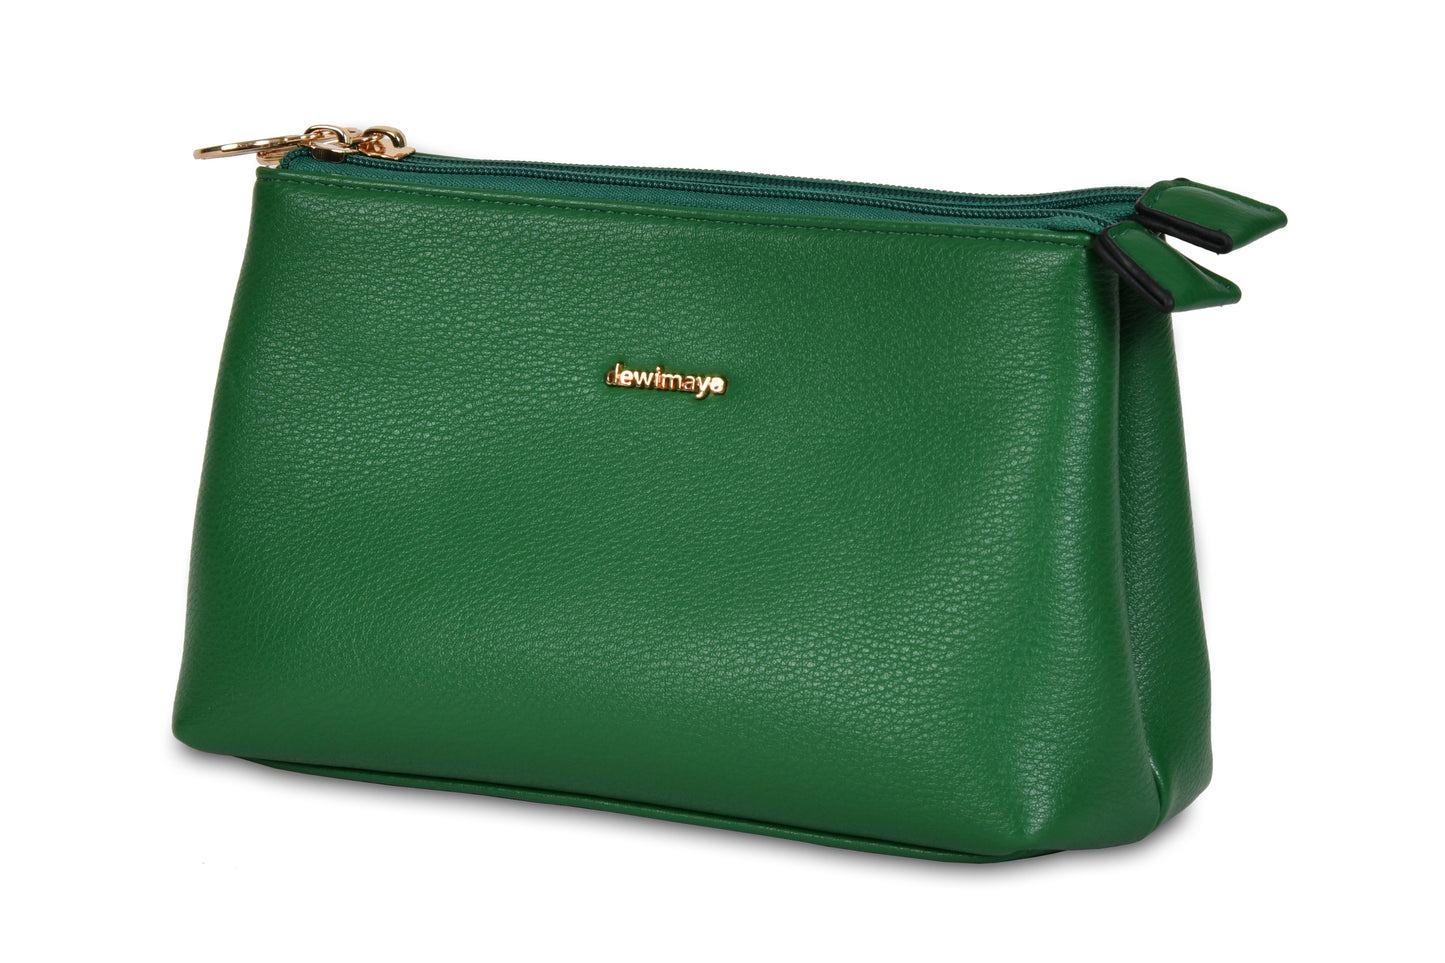 Liliana Green Pebble Grain Faux Leather Handbag Clutch Make up Pouch made by Dewi Maya side view available at the best boutique in Upstate South Carolina Spartanburg Greenville Dewi Maya Boutique